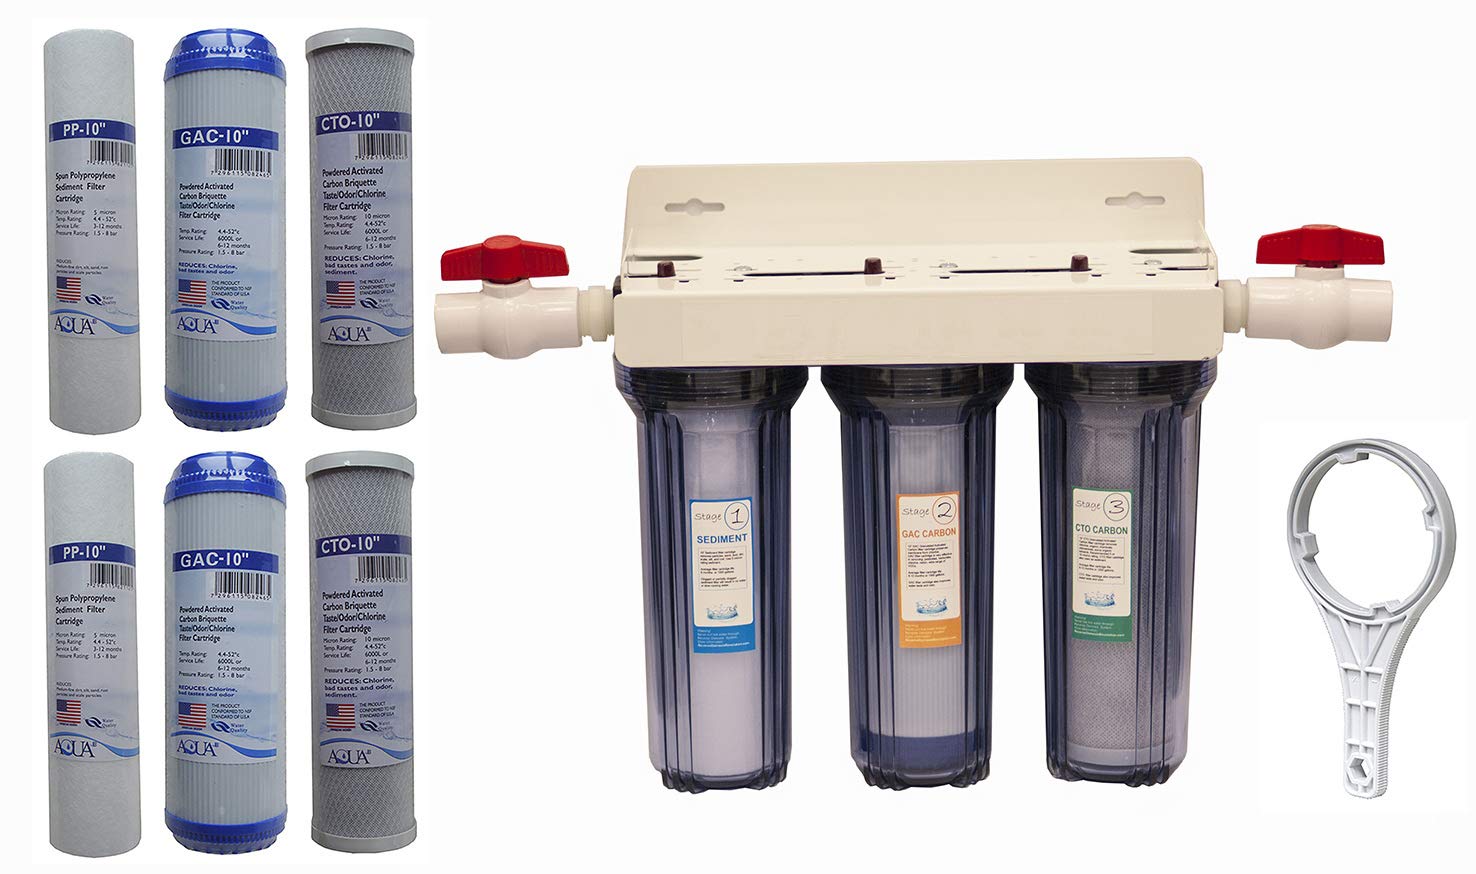 Preventive Maintenance Tips for Water Filtration Systems